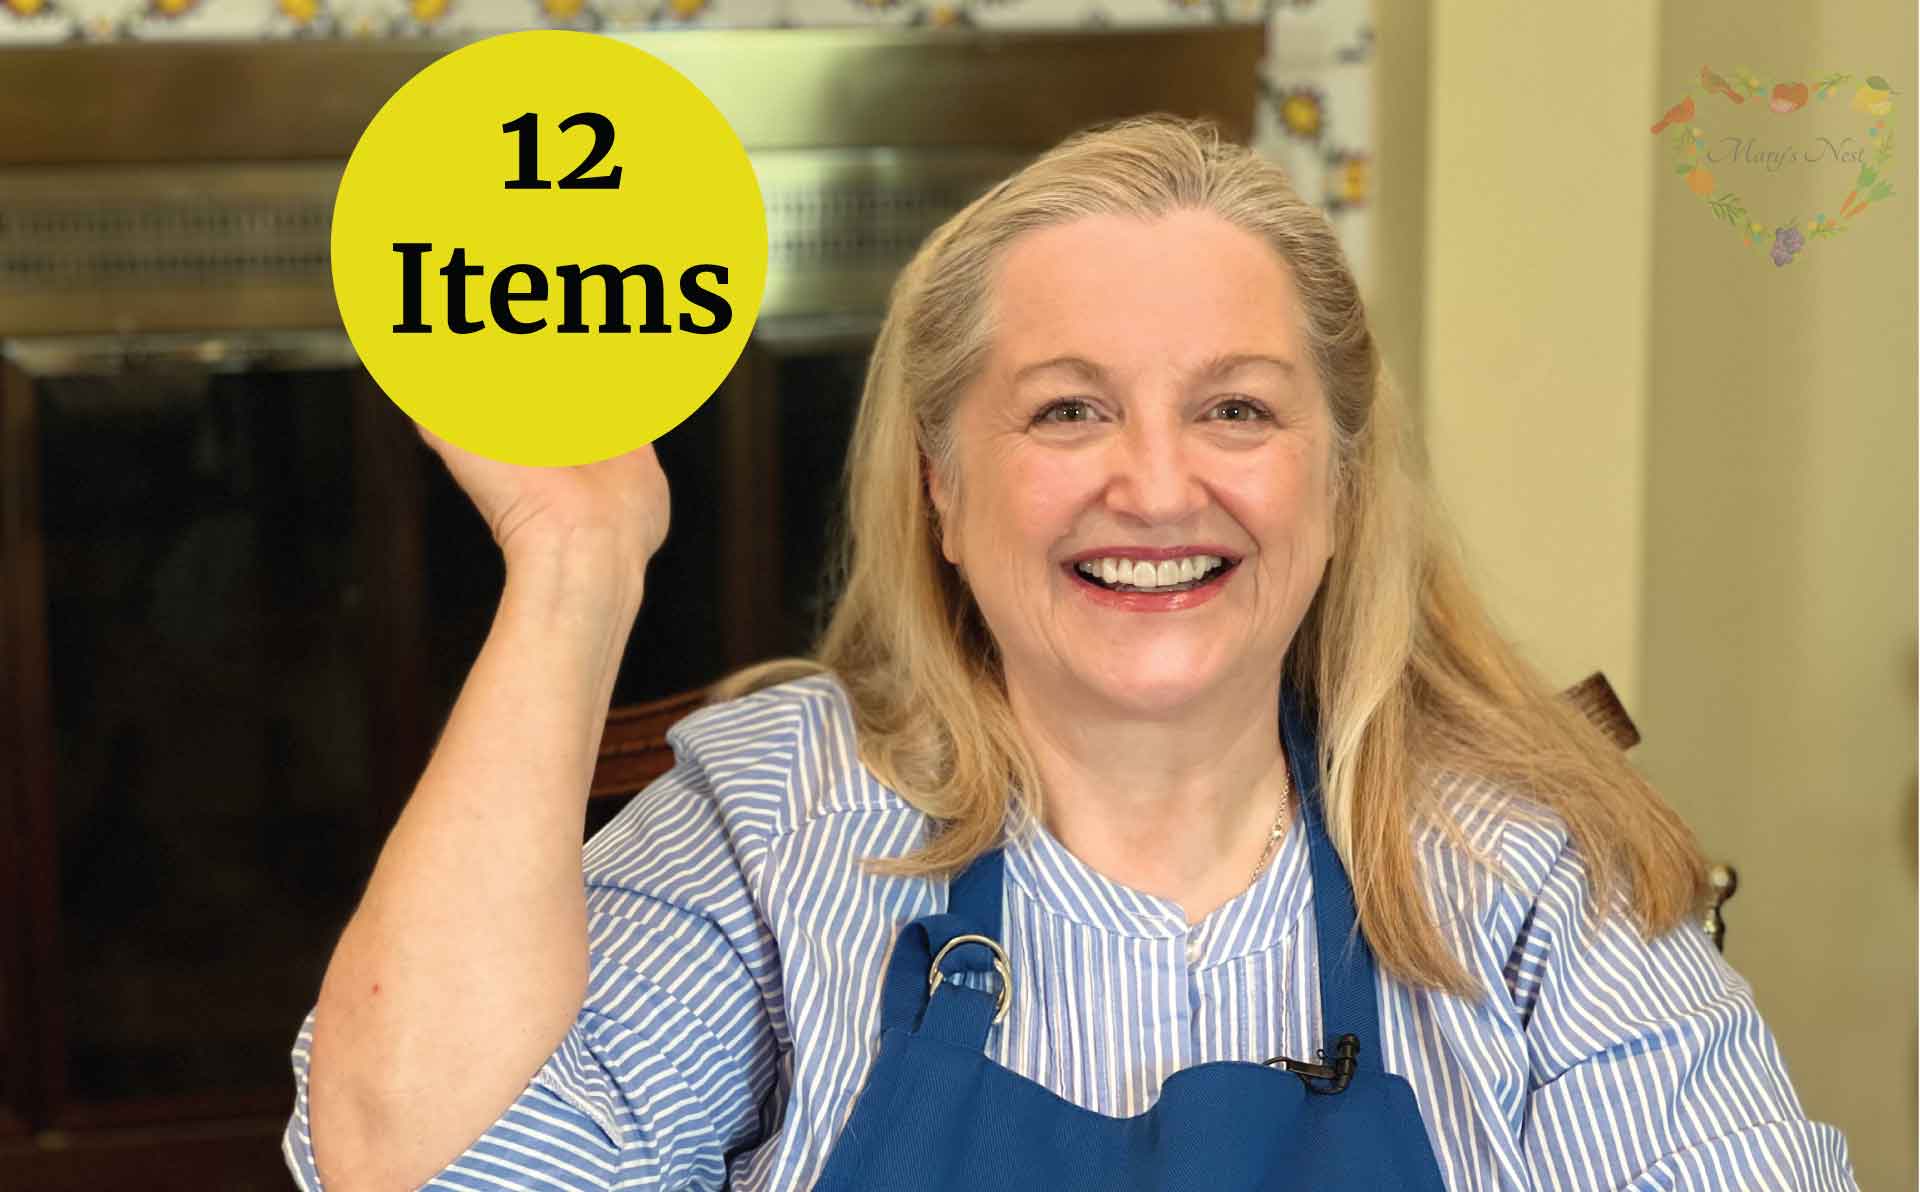 10 Crucial Prepper Pantry Items You Need to Stock Now! - Mary's Nest